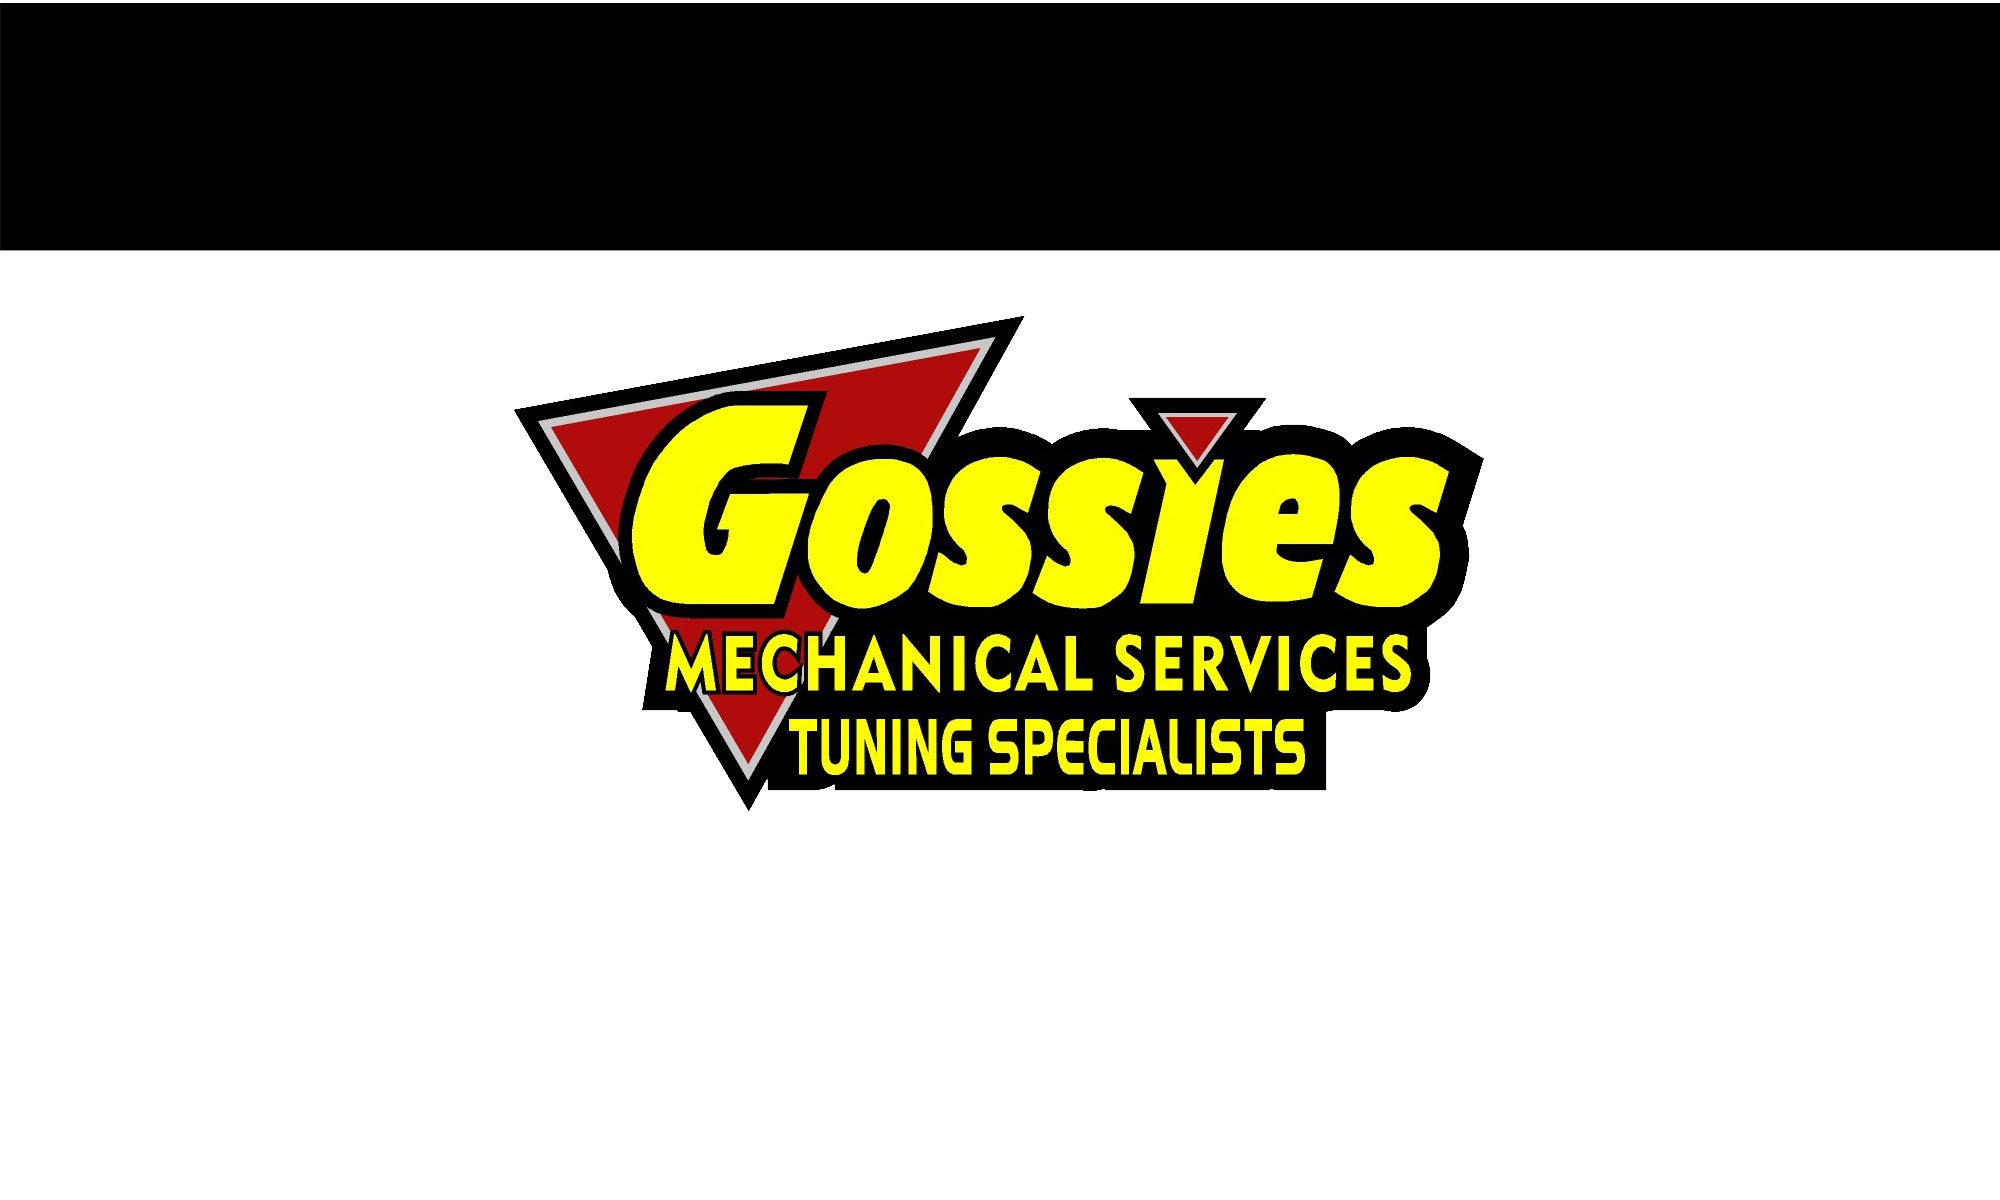 Gossies Mechanical Services